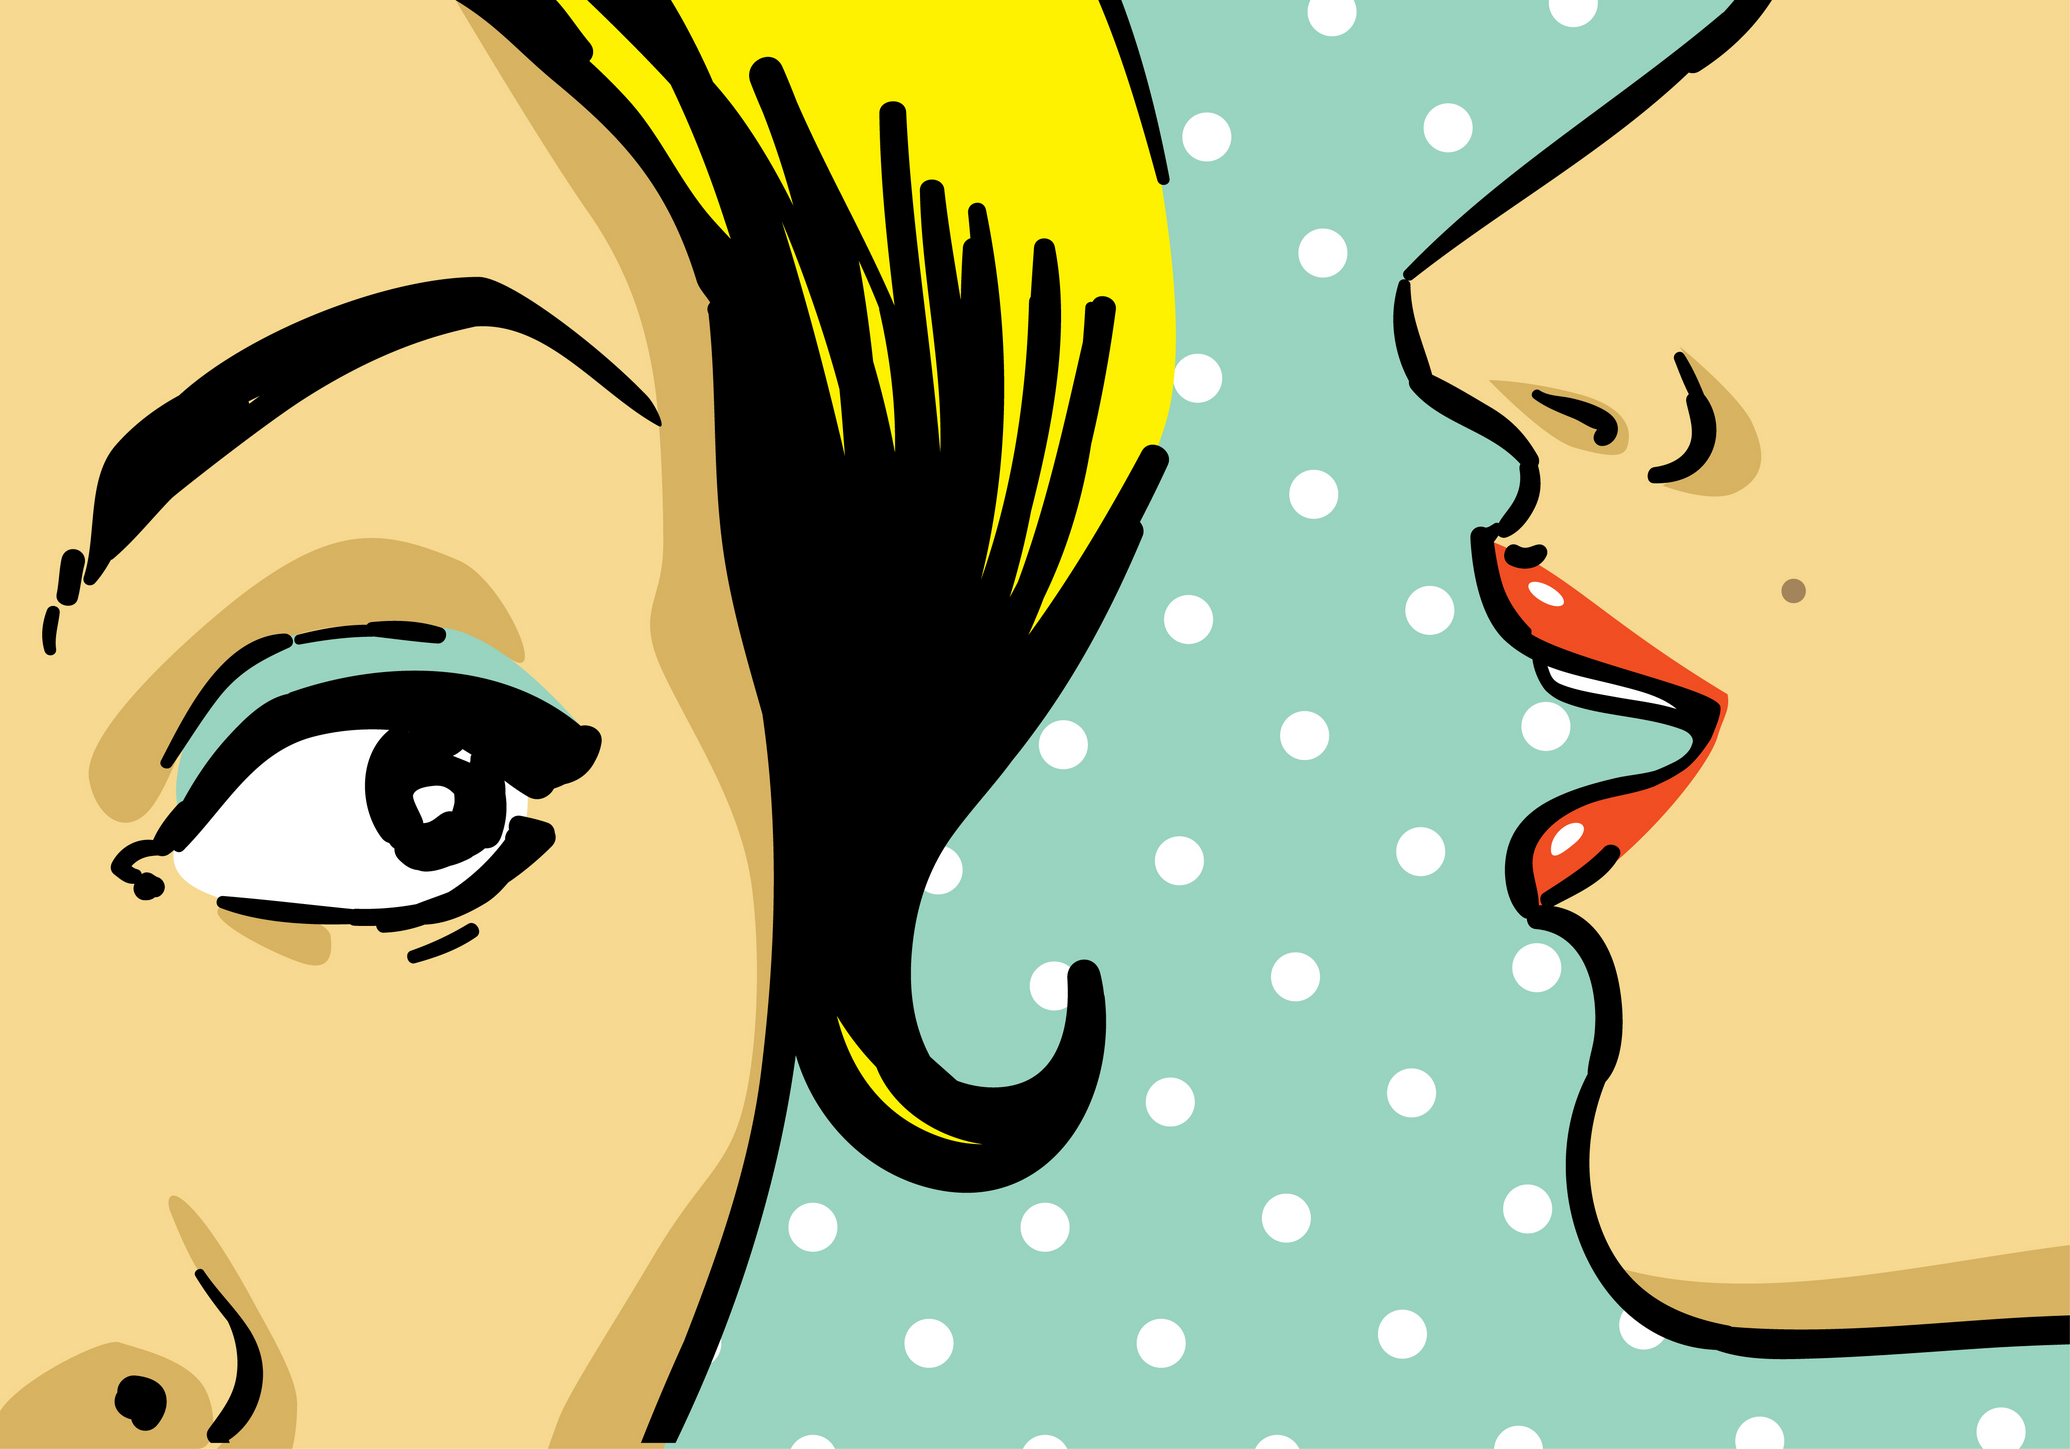 Word-Of-Mouth Marketing in Digital Age